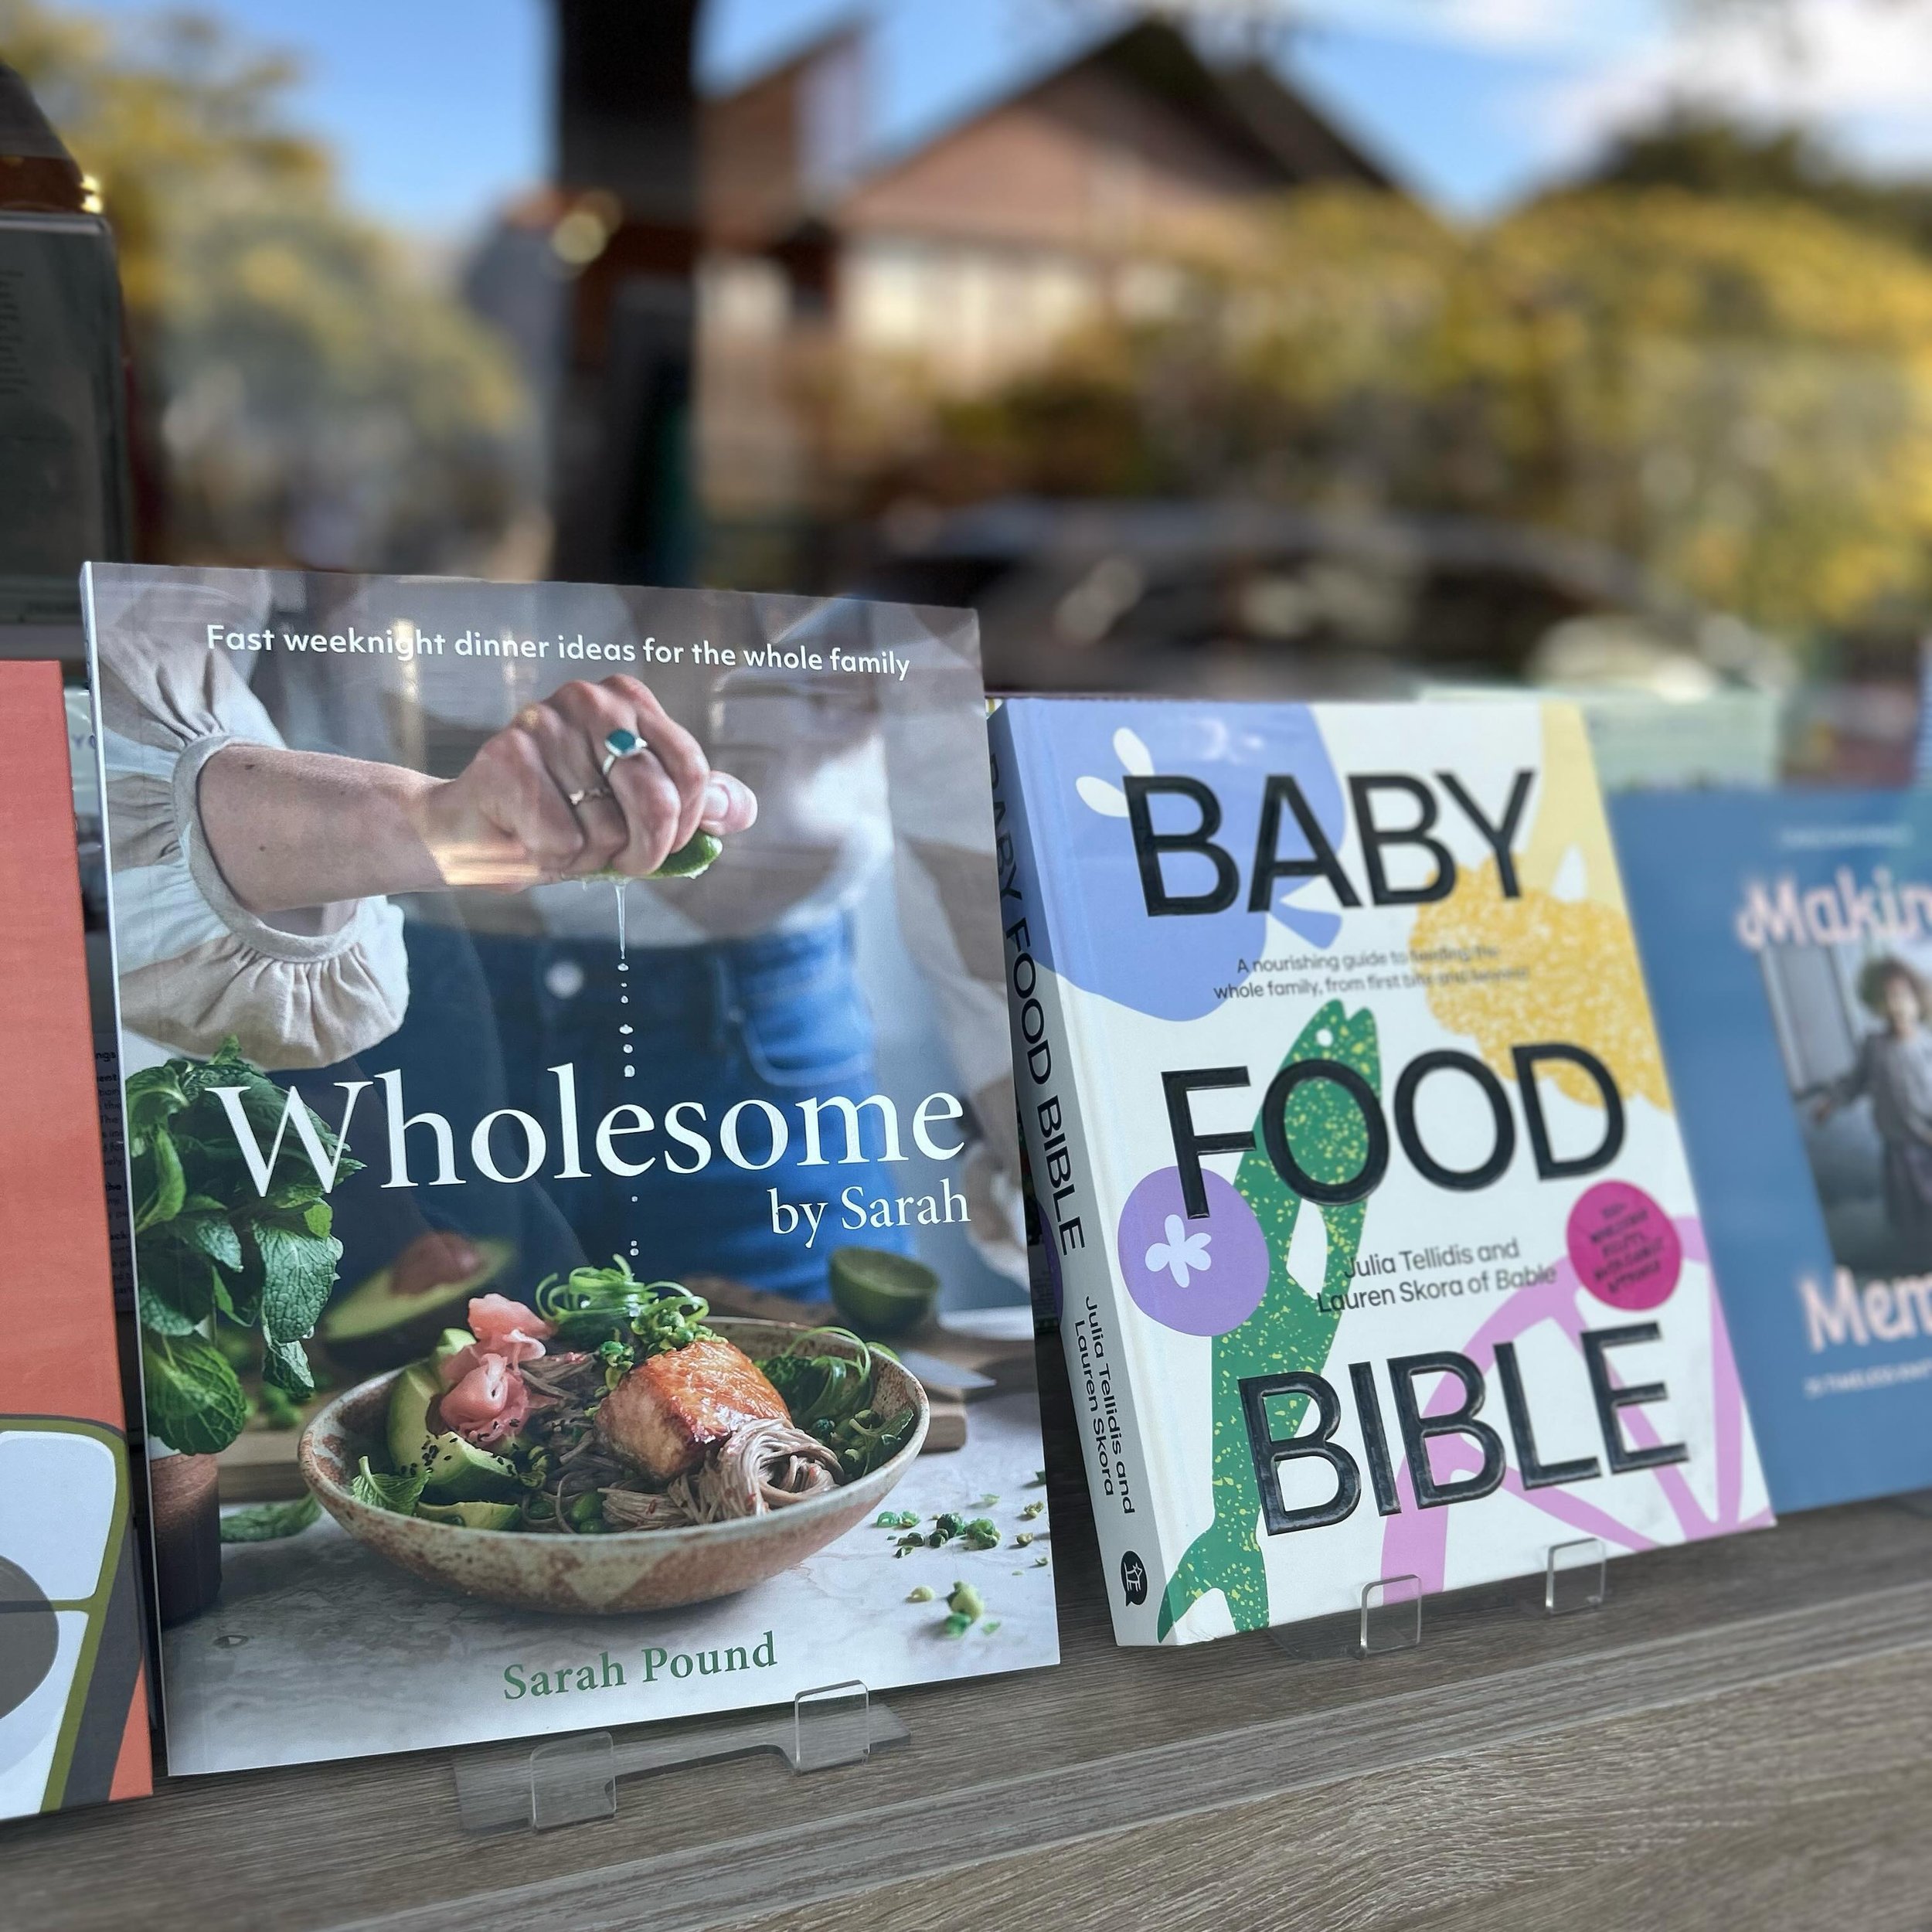 Two new fast-selling cookbooks the whole family will love!🍴

Wholesome by @wholesomebysarah 
Baby Food Bible by @baby.food.bible 

Both by Australian women and both making dinner time simple, quick and full of goodness 💚 (we sold out of Baby Food B